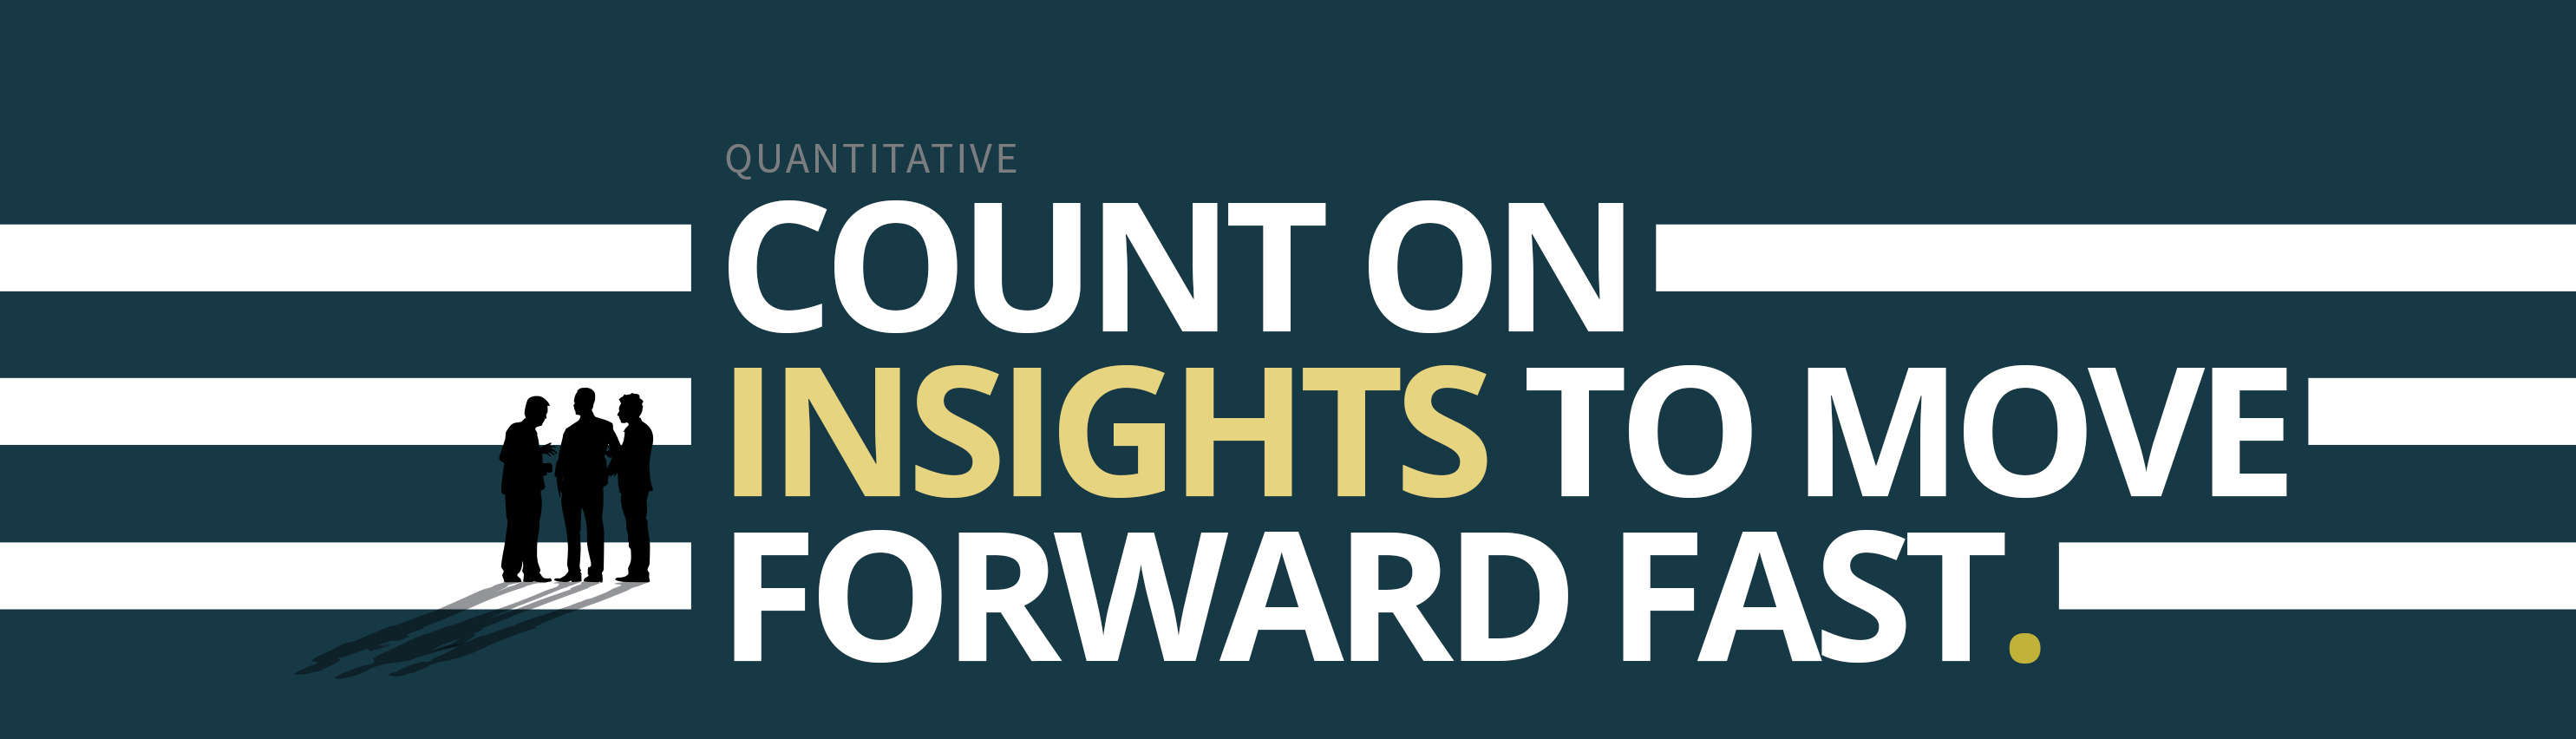 Count on Insights to Move Forward Fast | Quantitative Research Methods | Survey Research | Meeting St. Insights